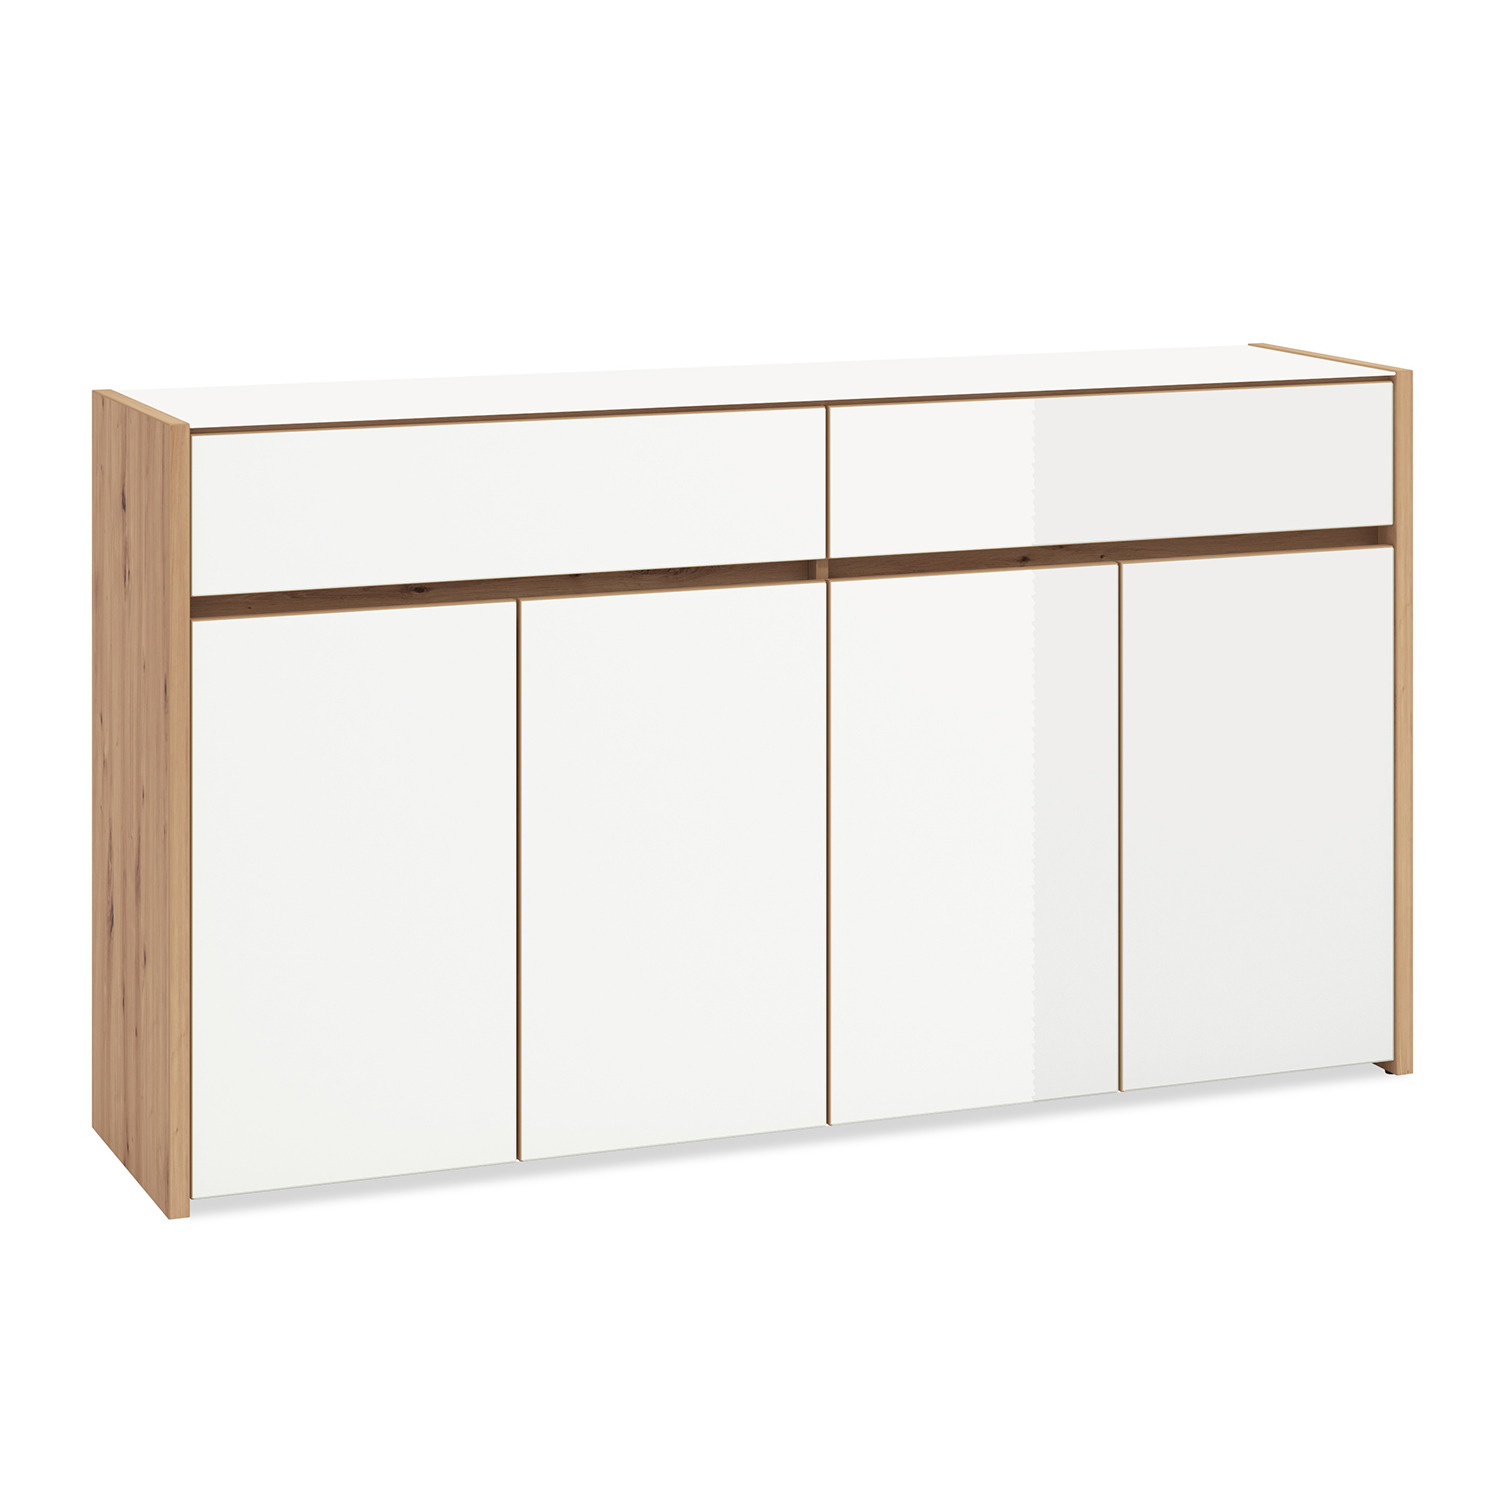 Chest of Drawers Sideboard Wood Oak High Gloss White Solid Cupboard with 2 Drawers